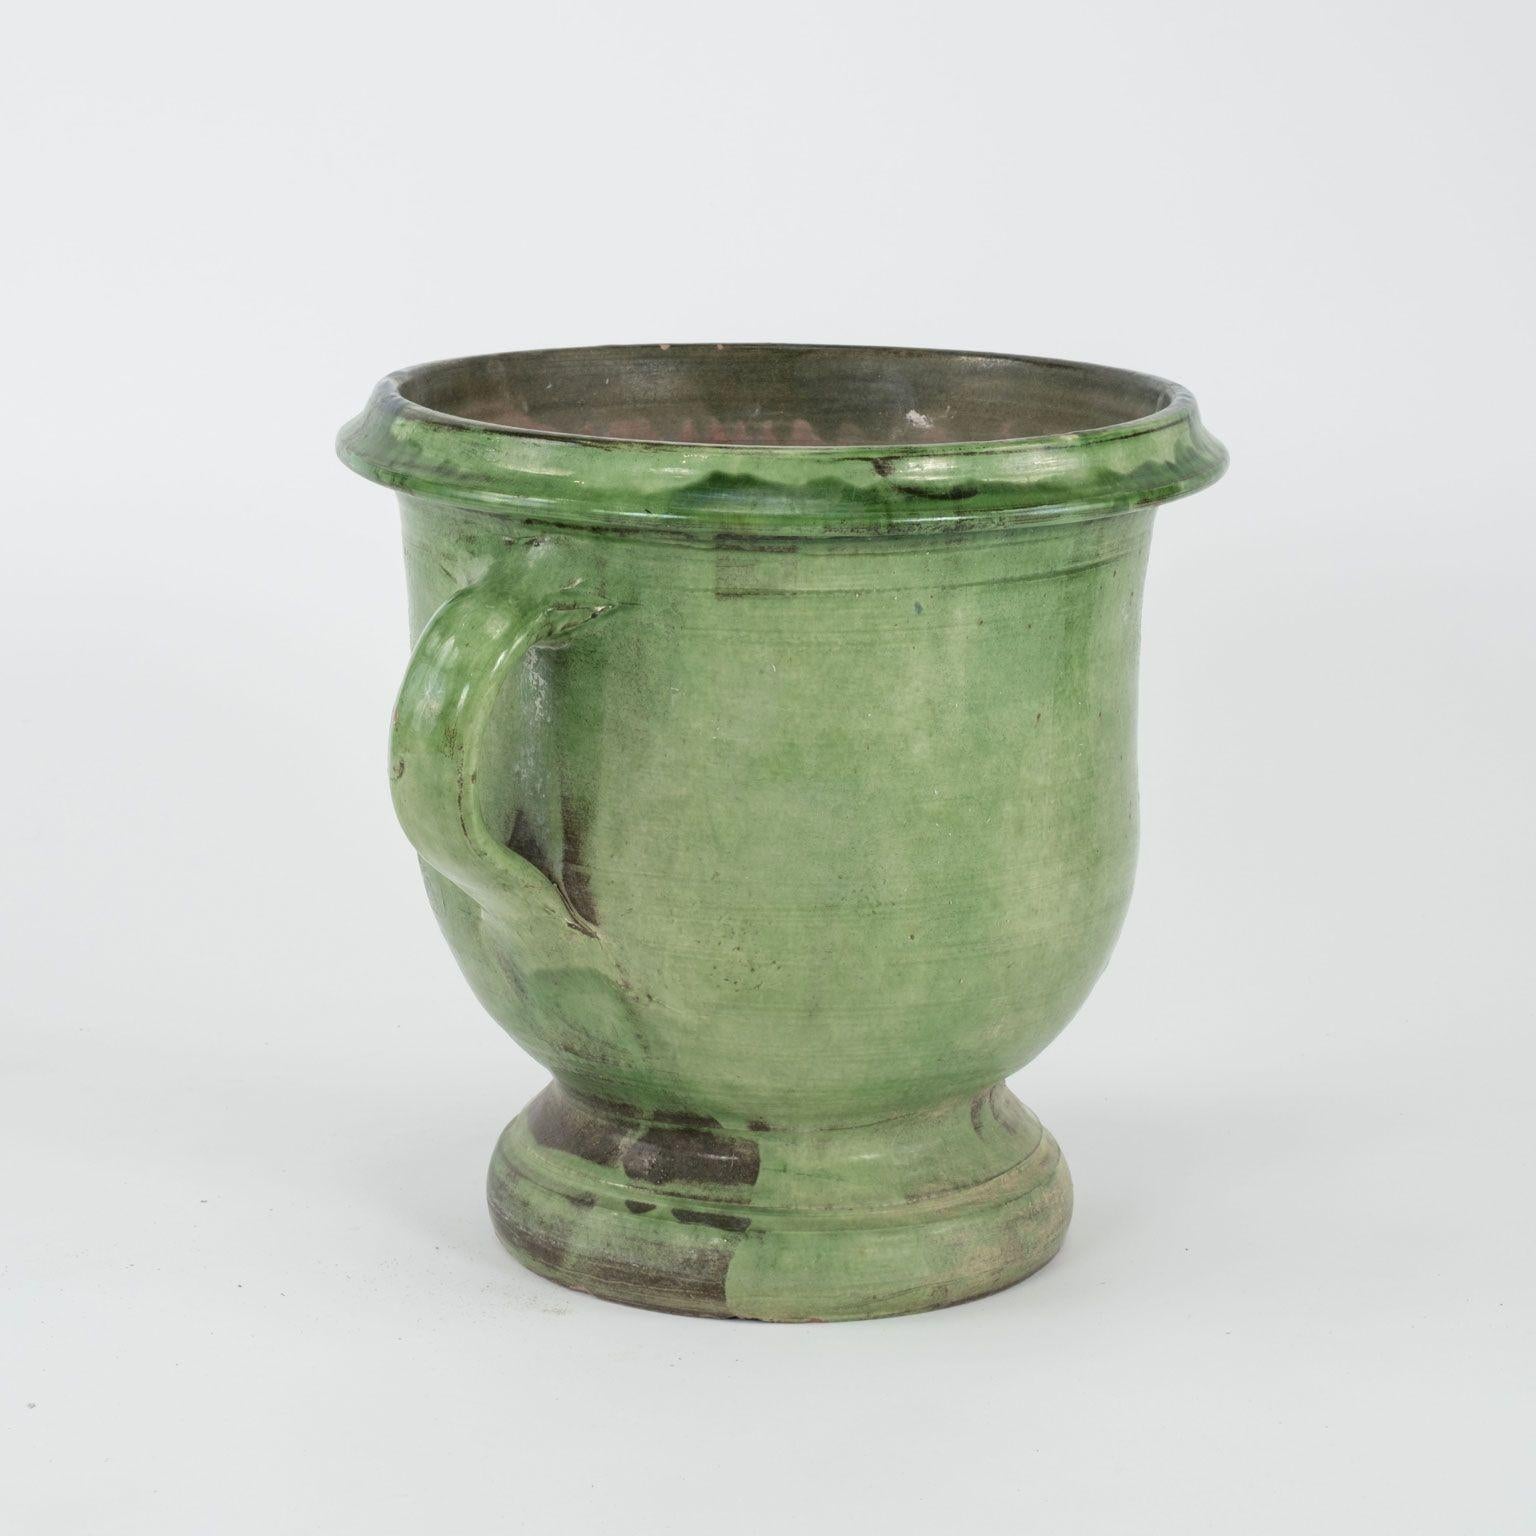 Green-glazed Castelnaudary planter, or Anduze jar, circa 1880-1909, France. Four similar size planters available (see last two images). Sold individually, priced $1,700 each.